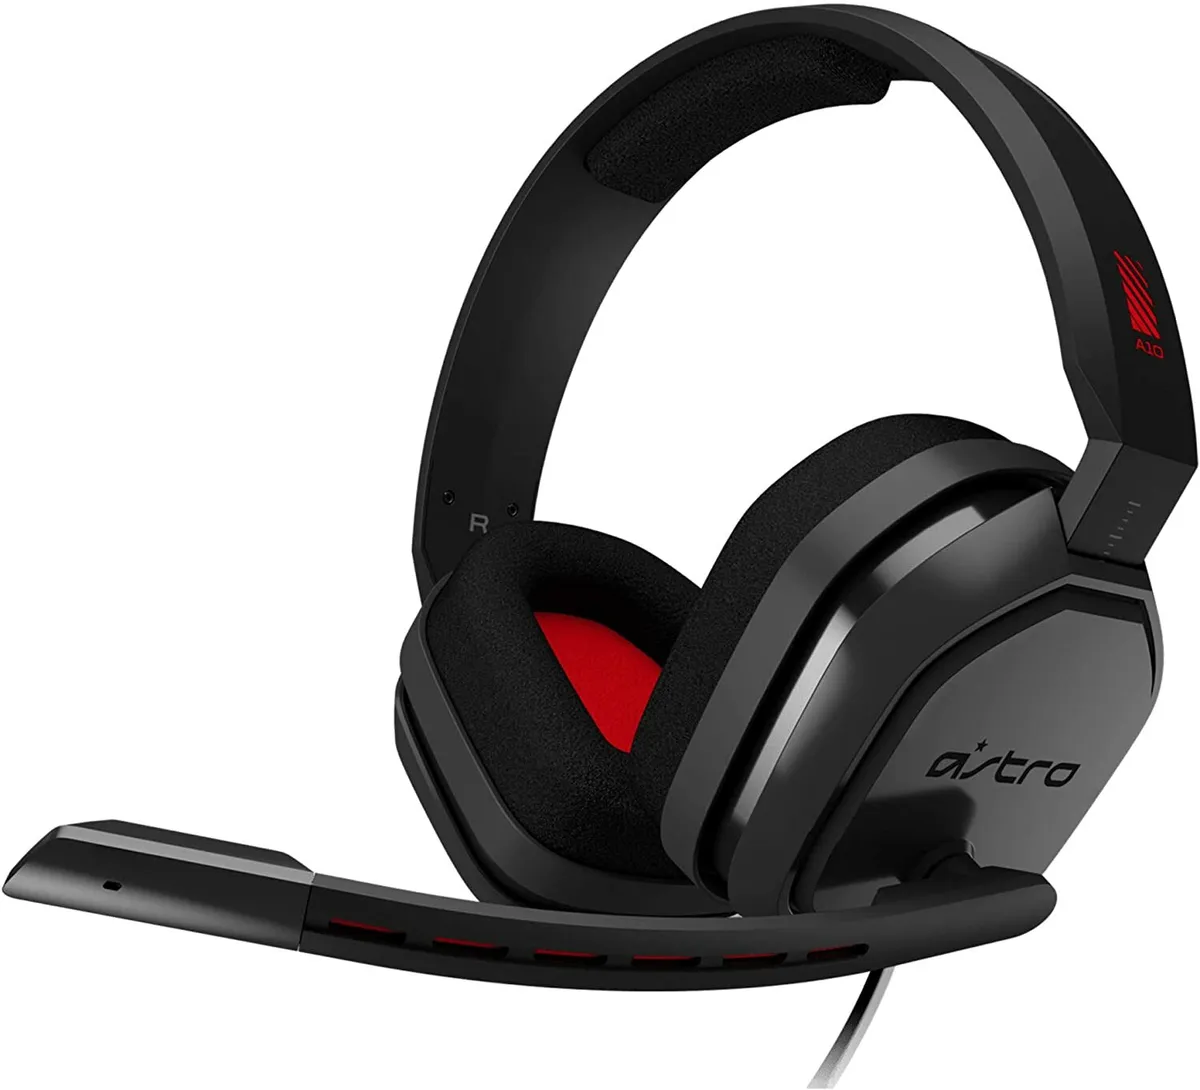 A10 HEADSET FOR PC - GREY/RED